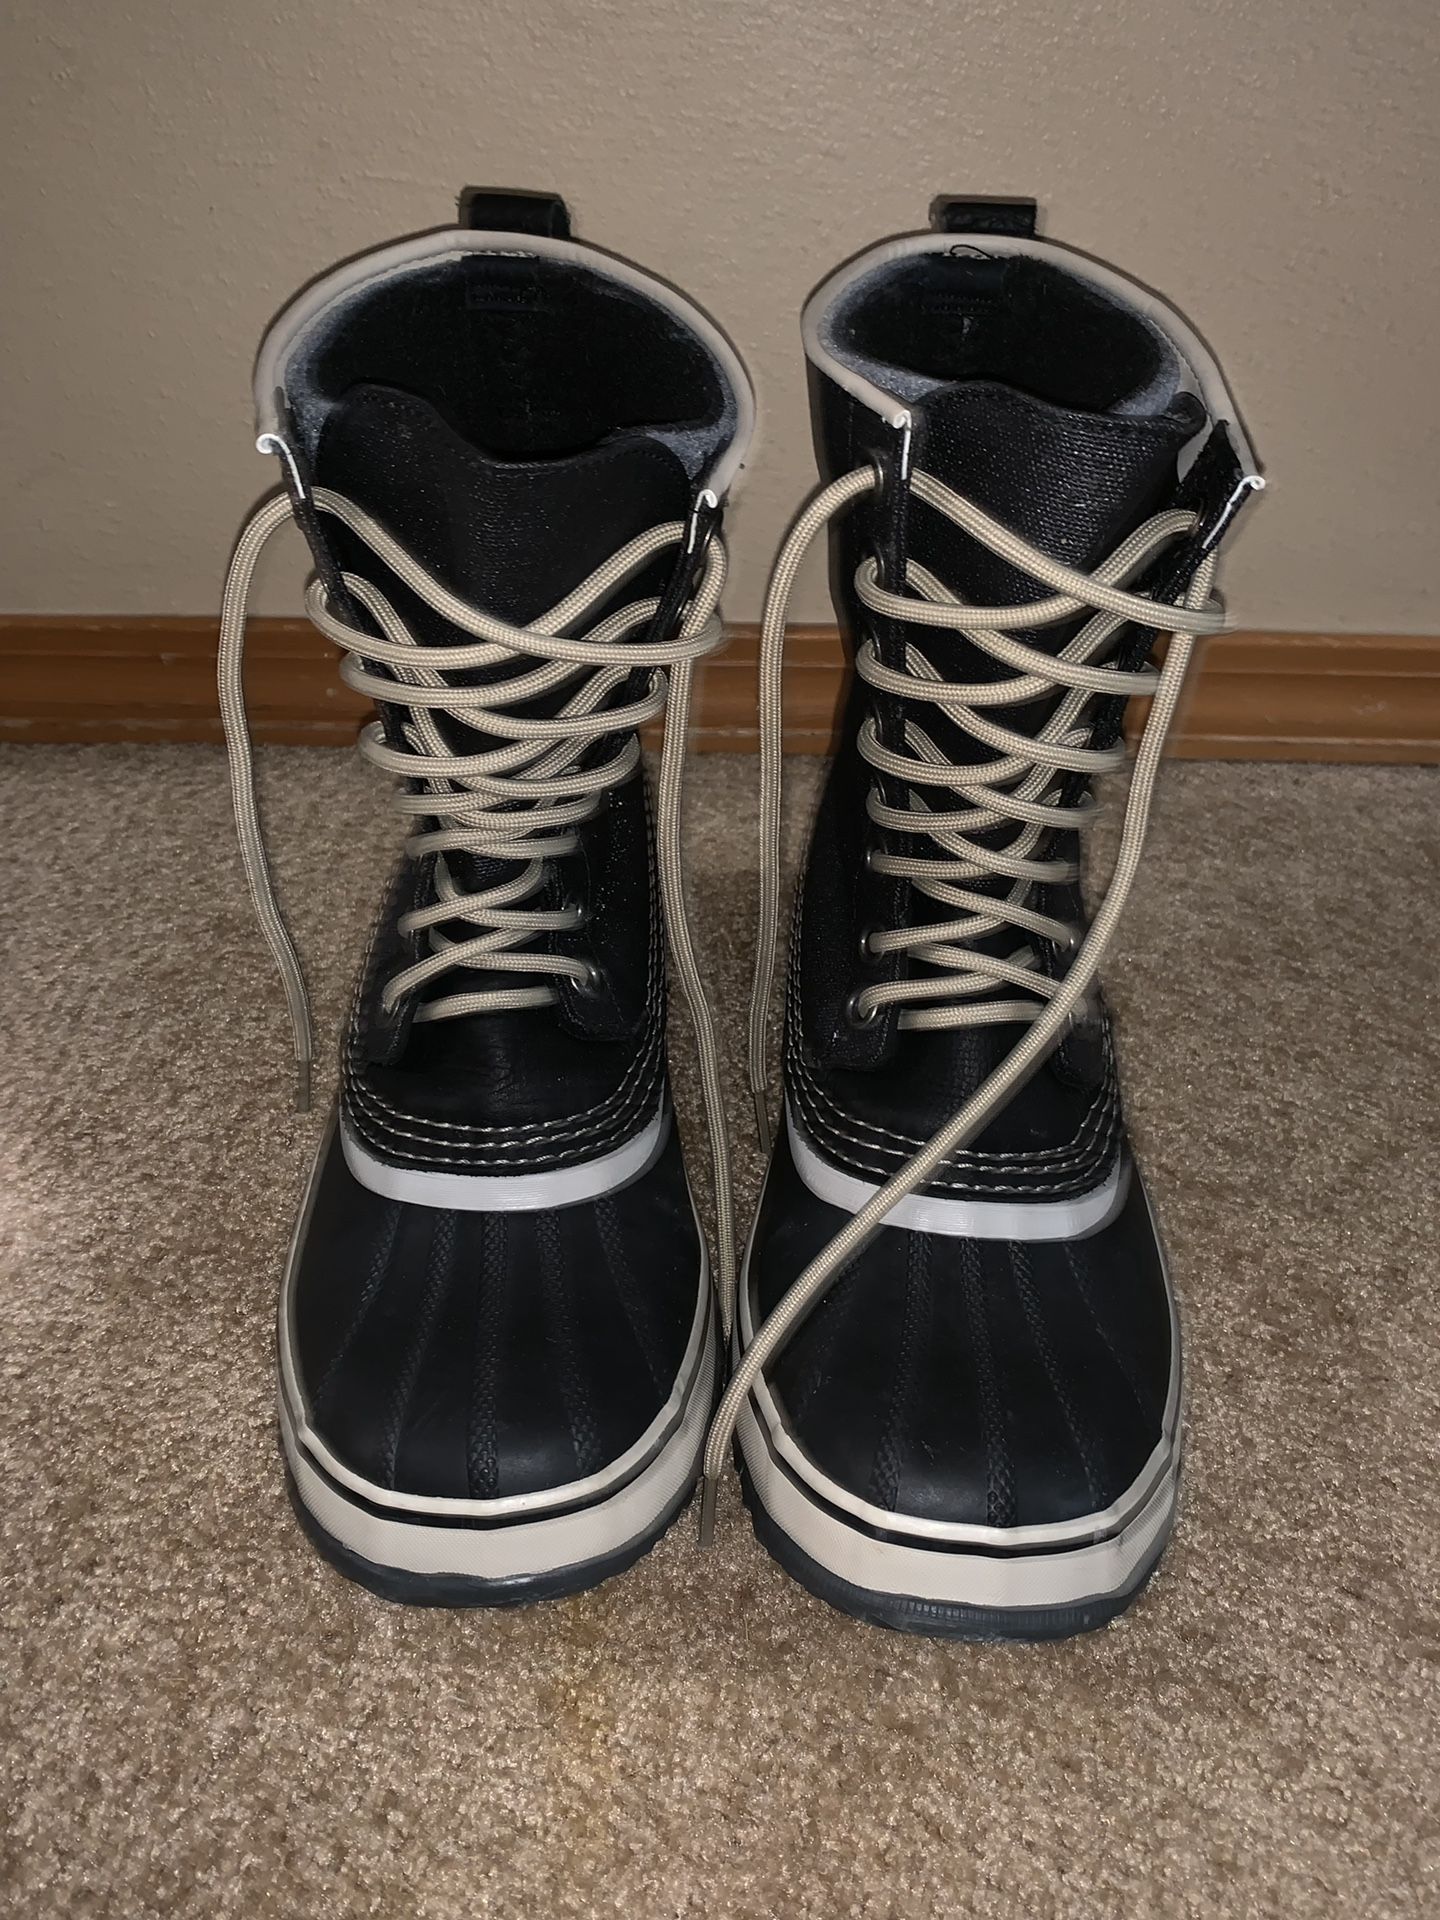 Womens Sorel Snow Boots - size 9.5 like new